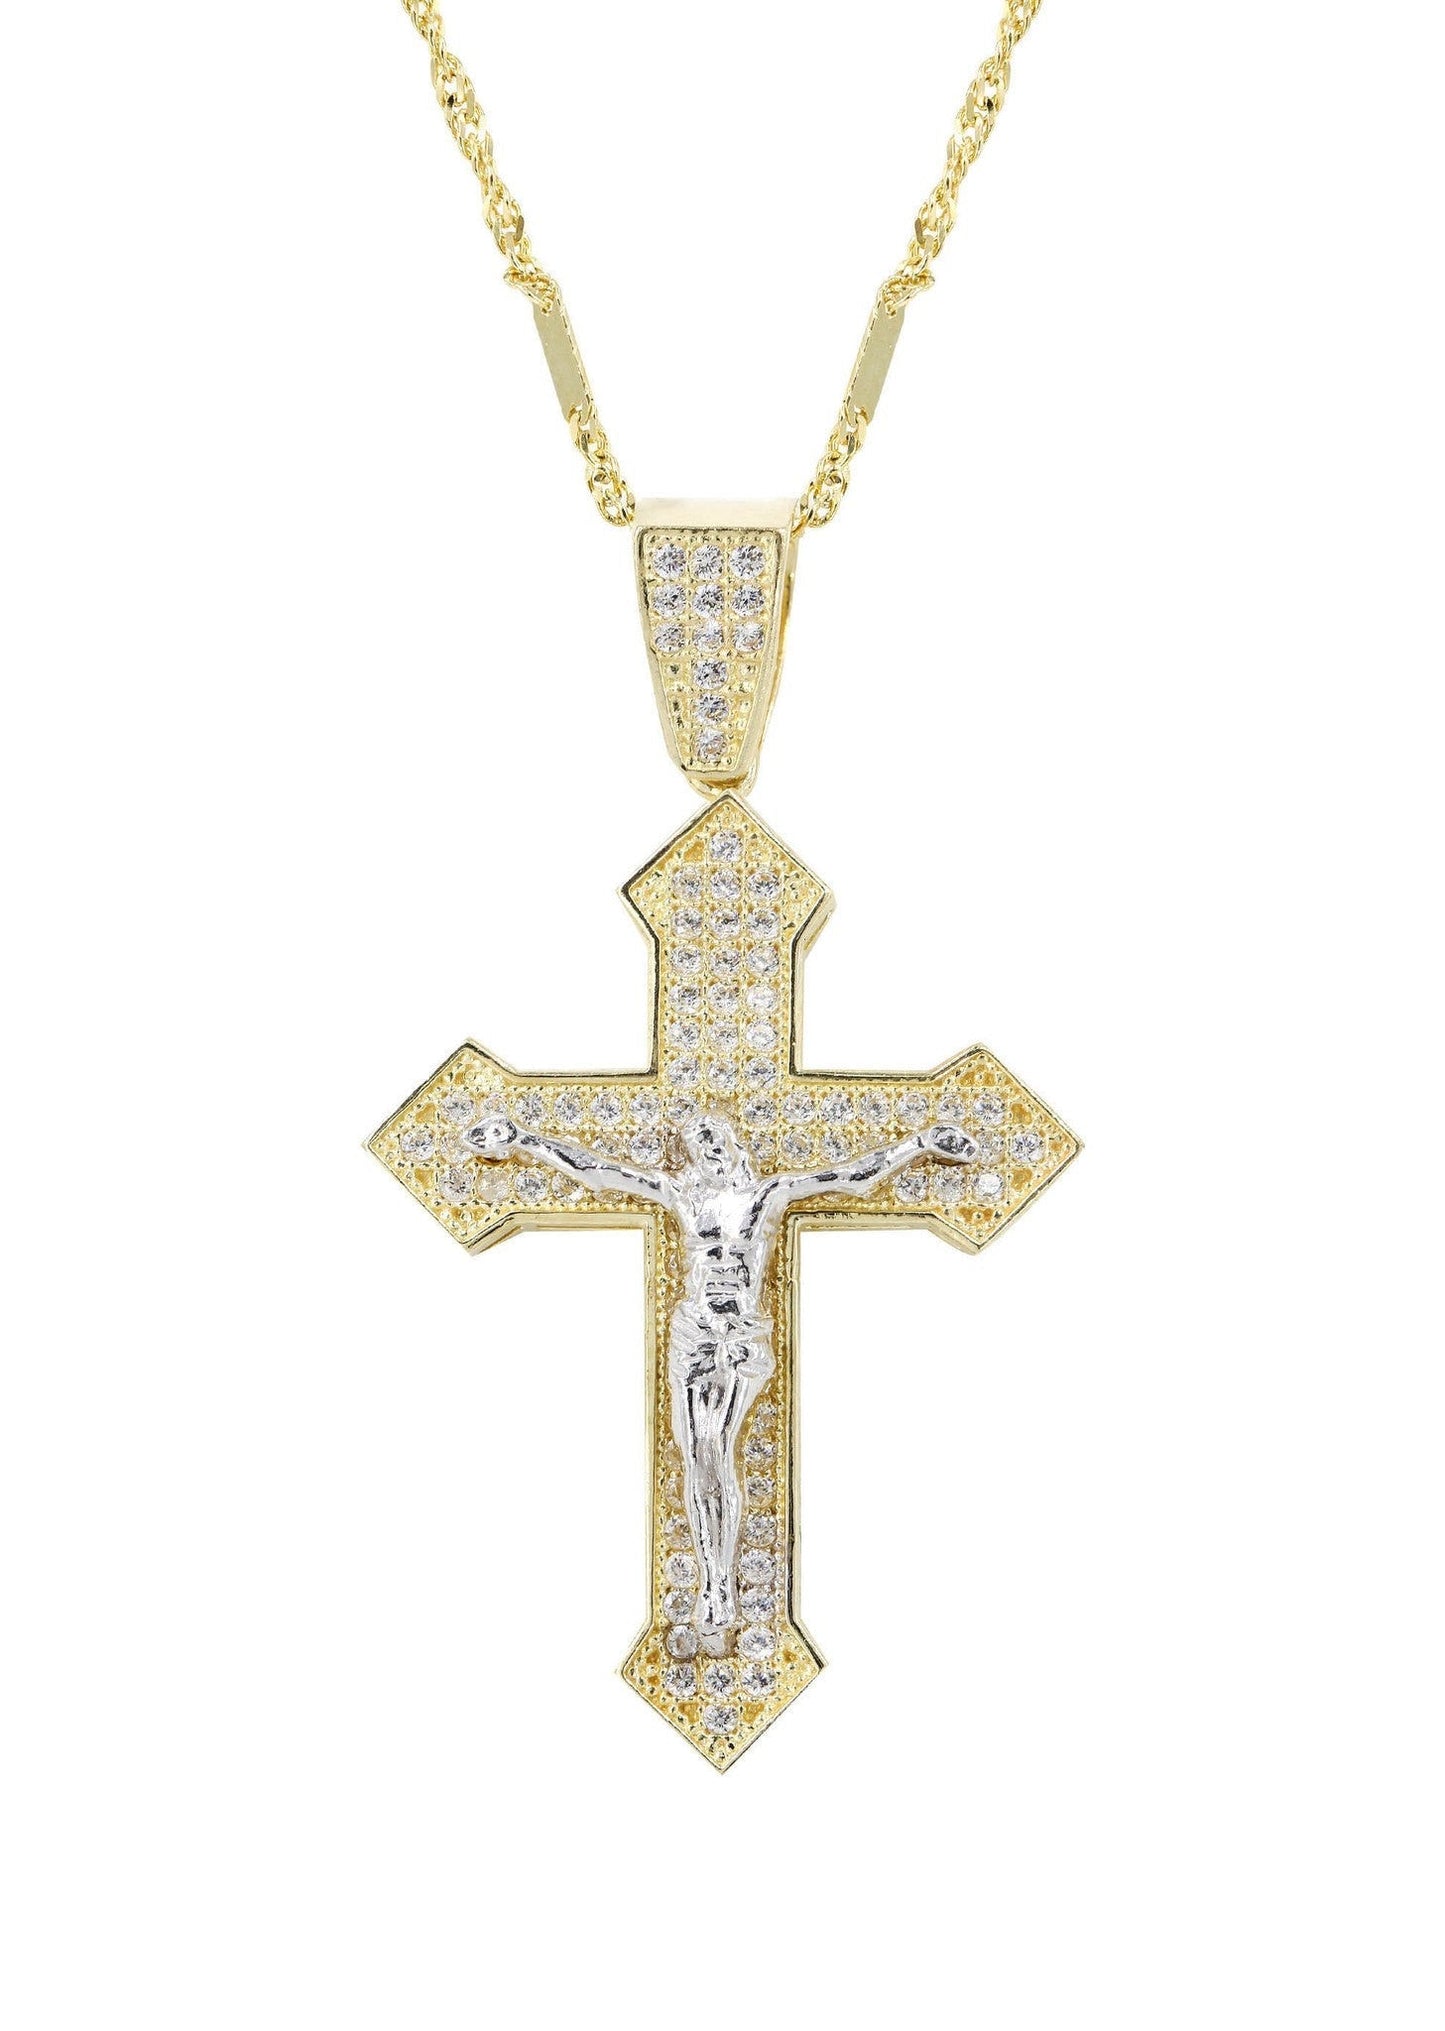 10K Yellow Gold Fancy Link Chain & Cz Gold Cross Necklace